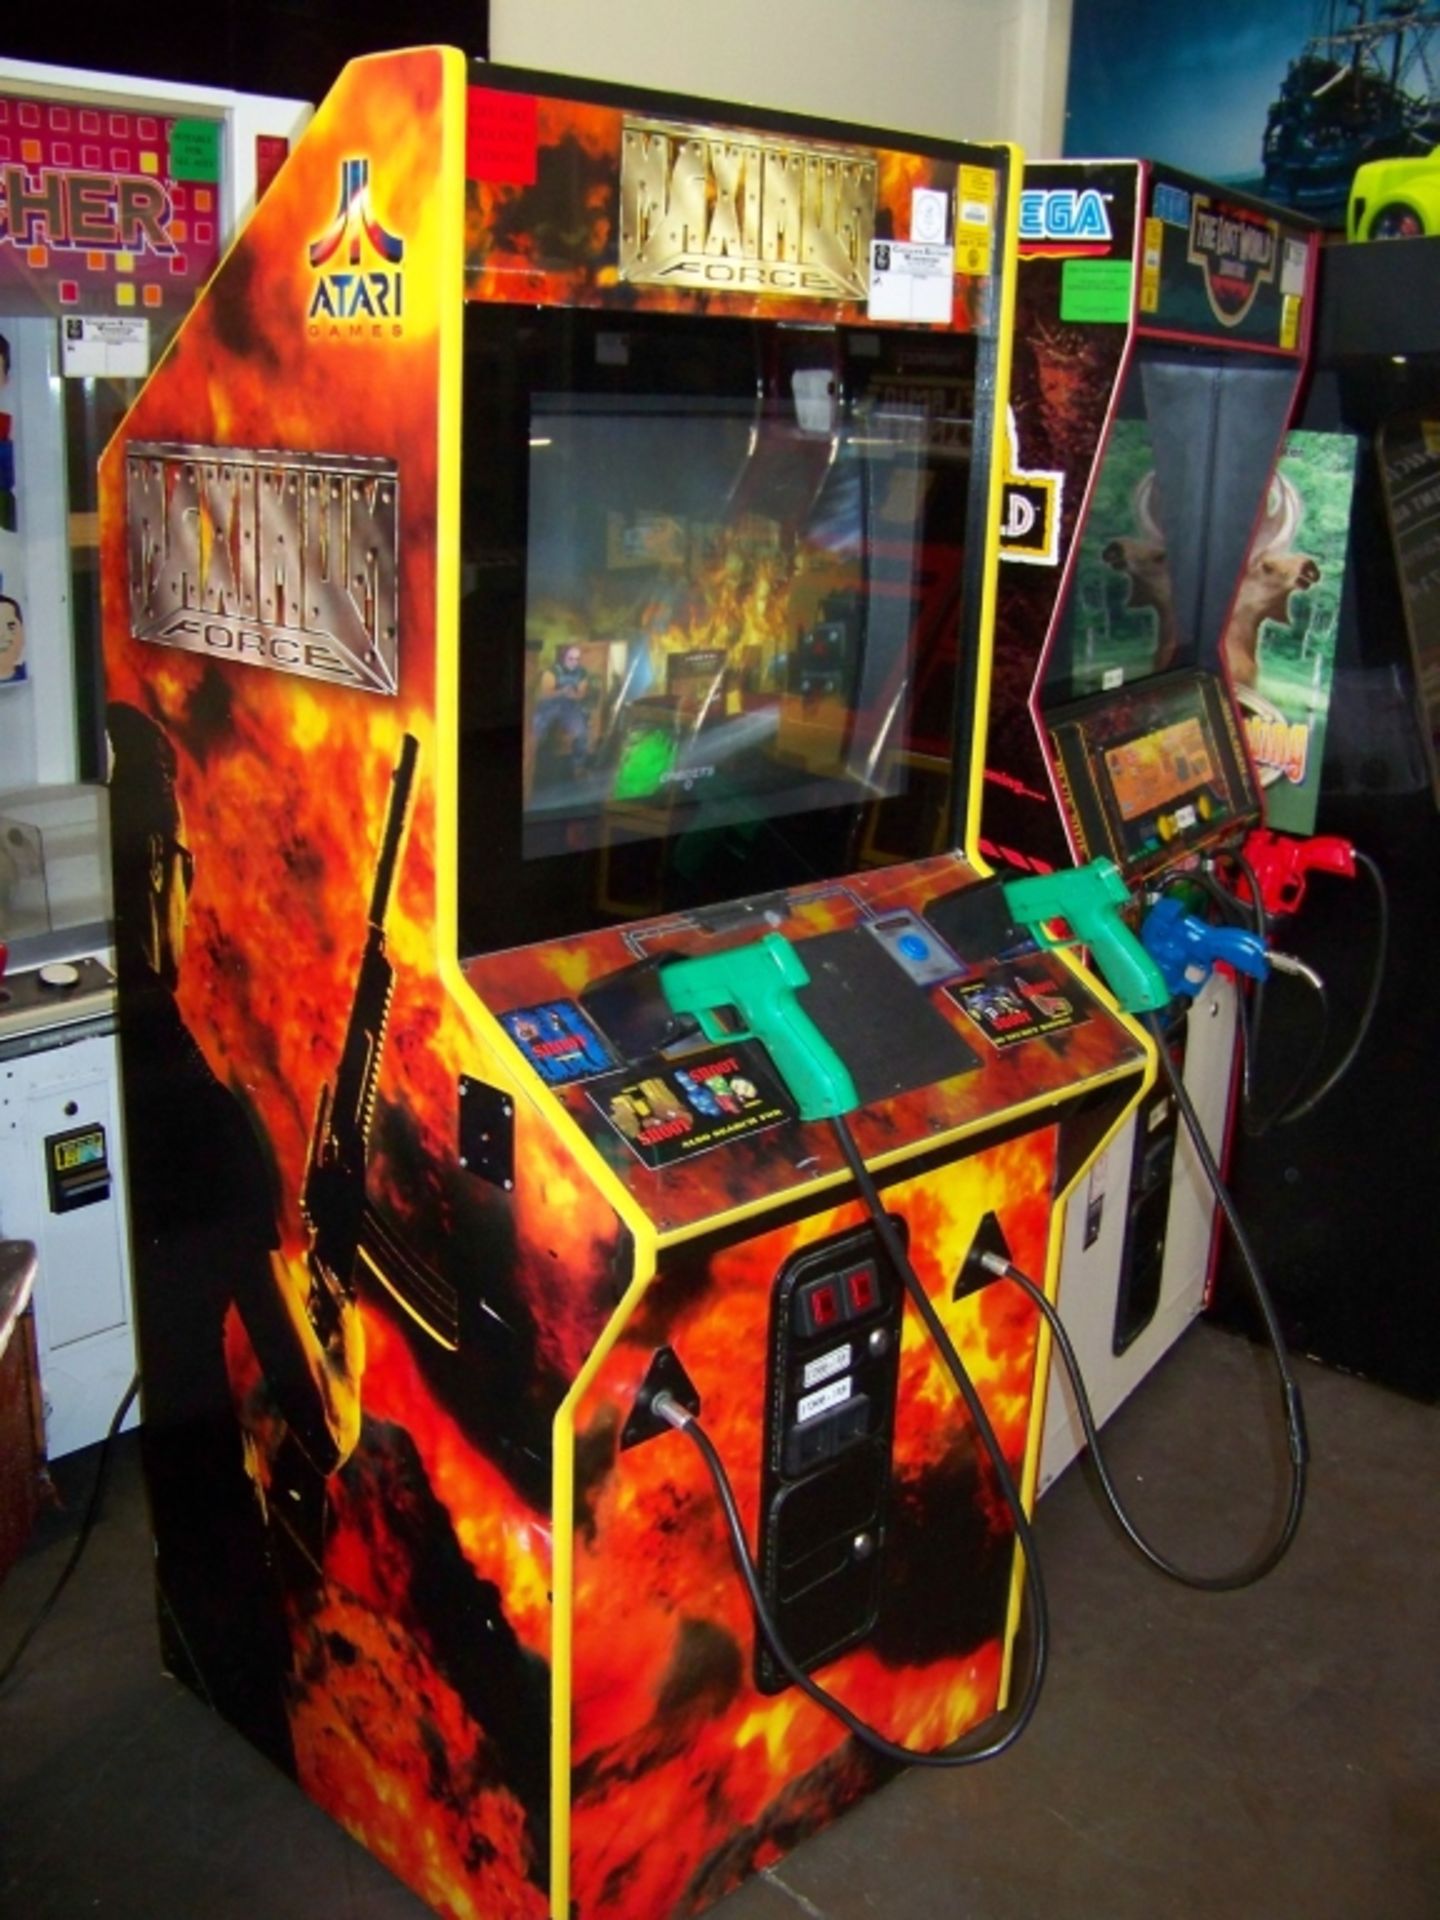 MAXIMUM FORCE DEDICATED SHOOTER ARCADE GAME M Item is in used condition. Evidence of wear and